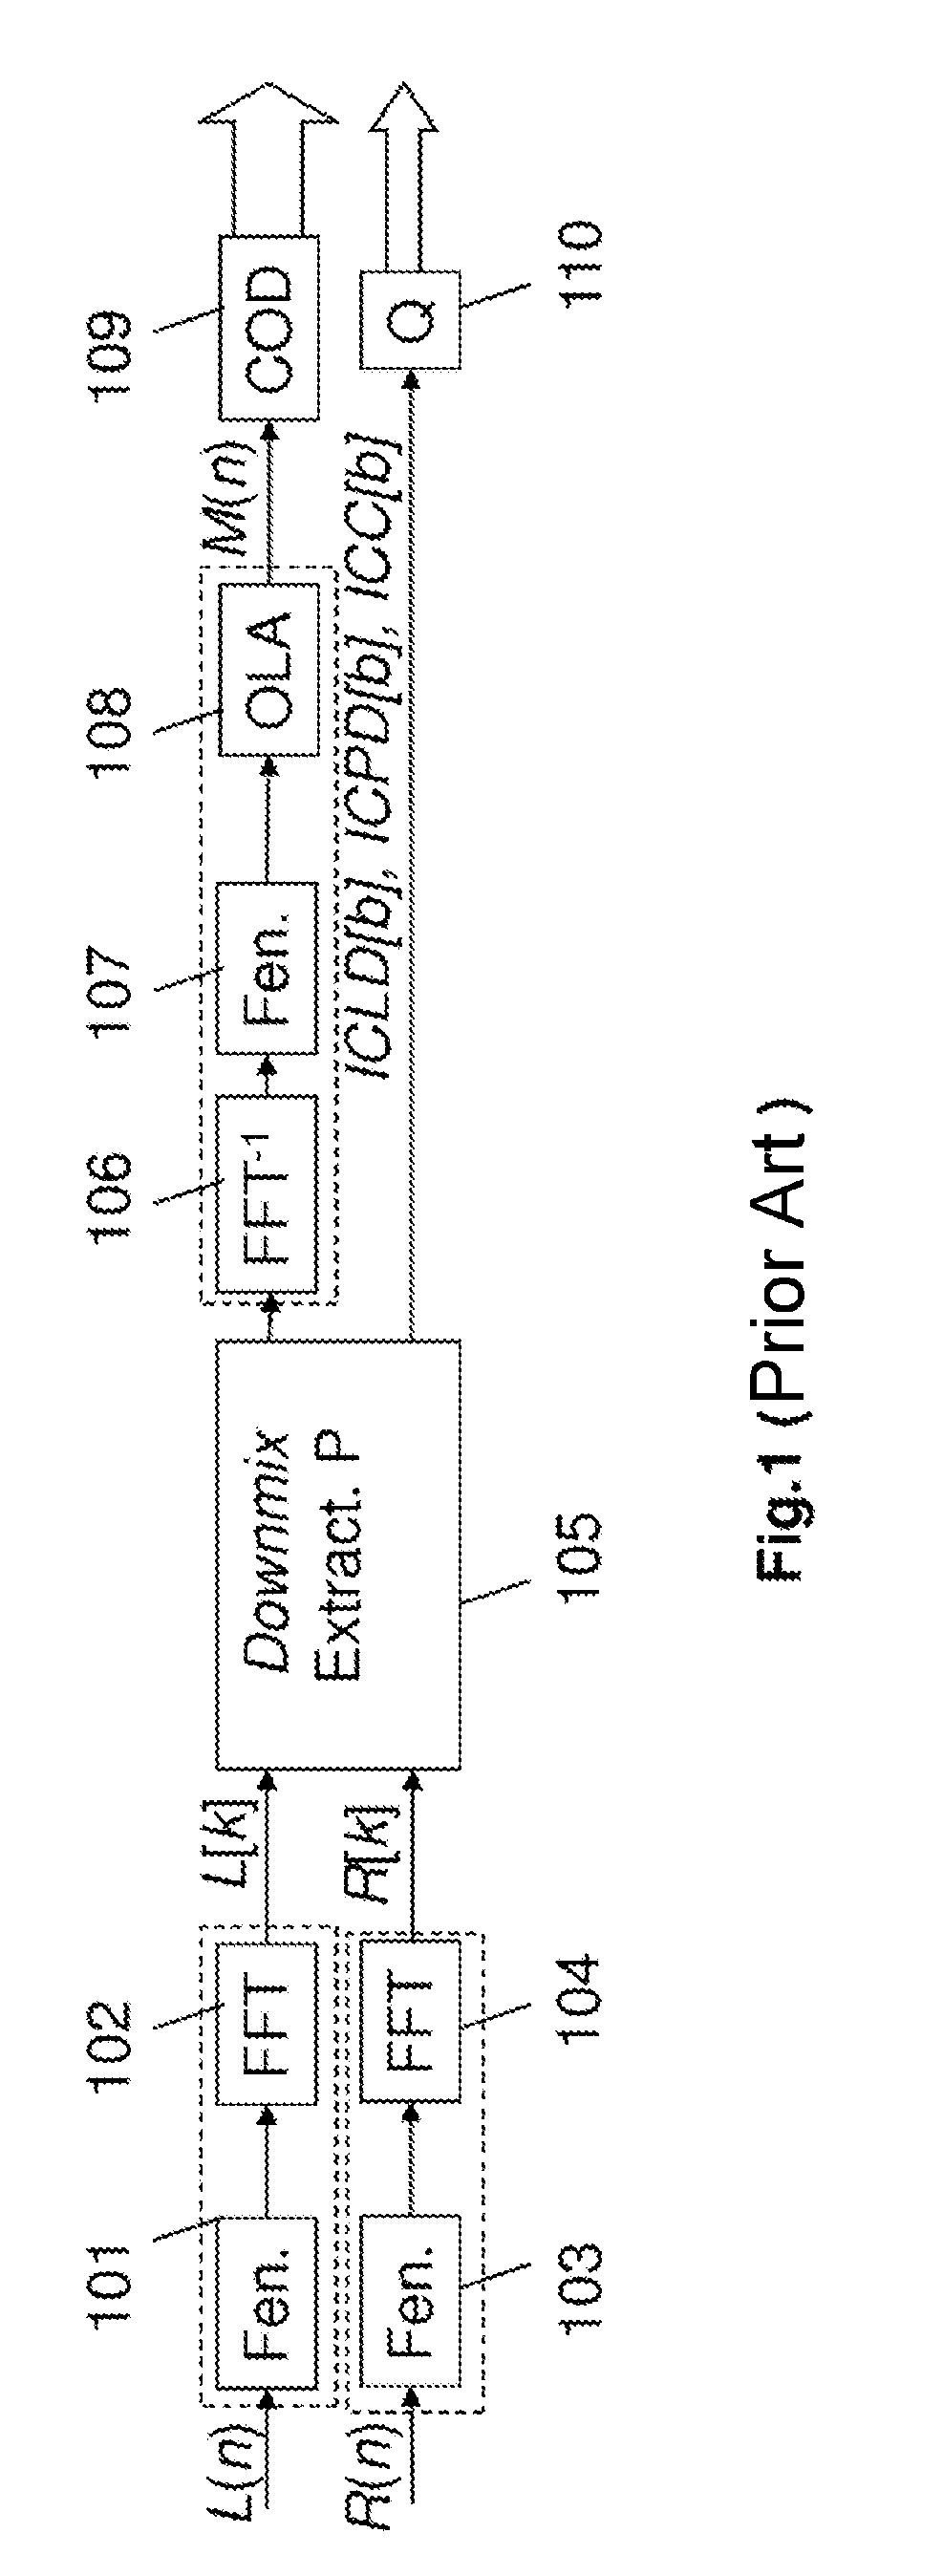 Optimized coding and decoding of spatialization information for the parametric coding and decoding of a multichannel audio signal